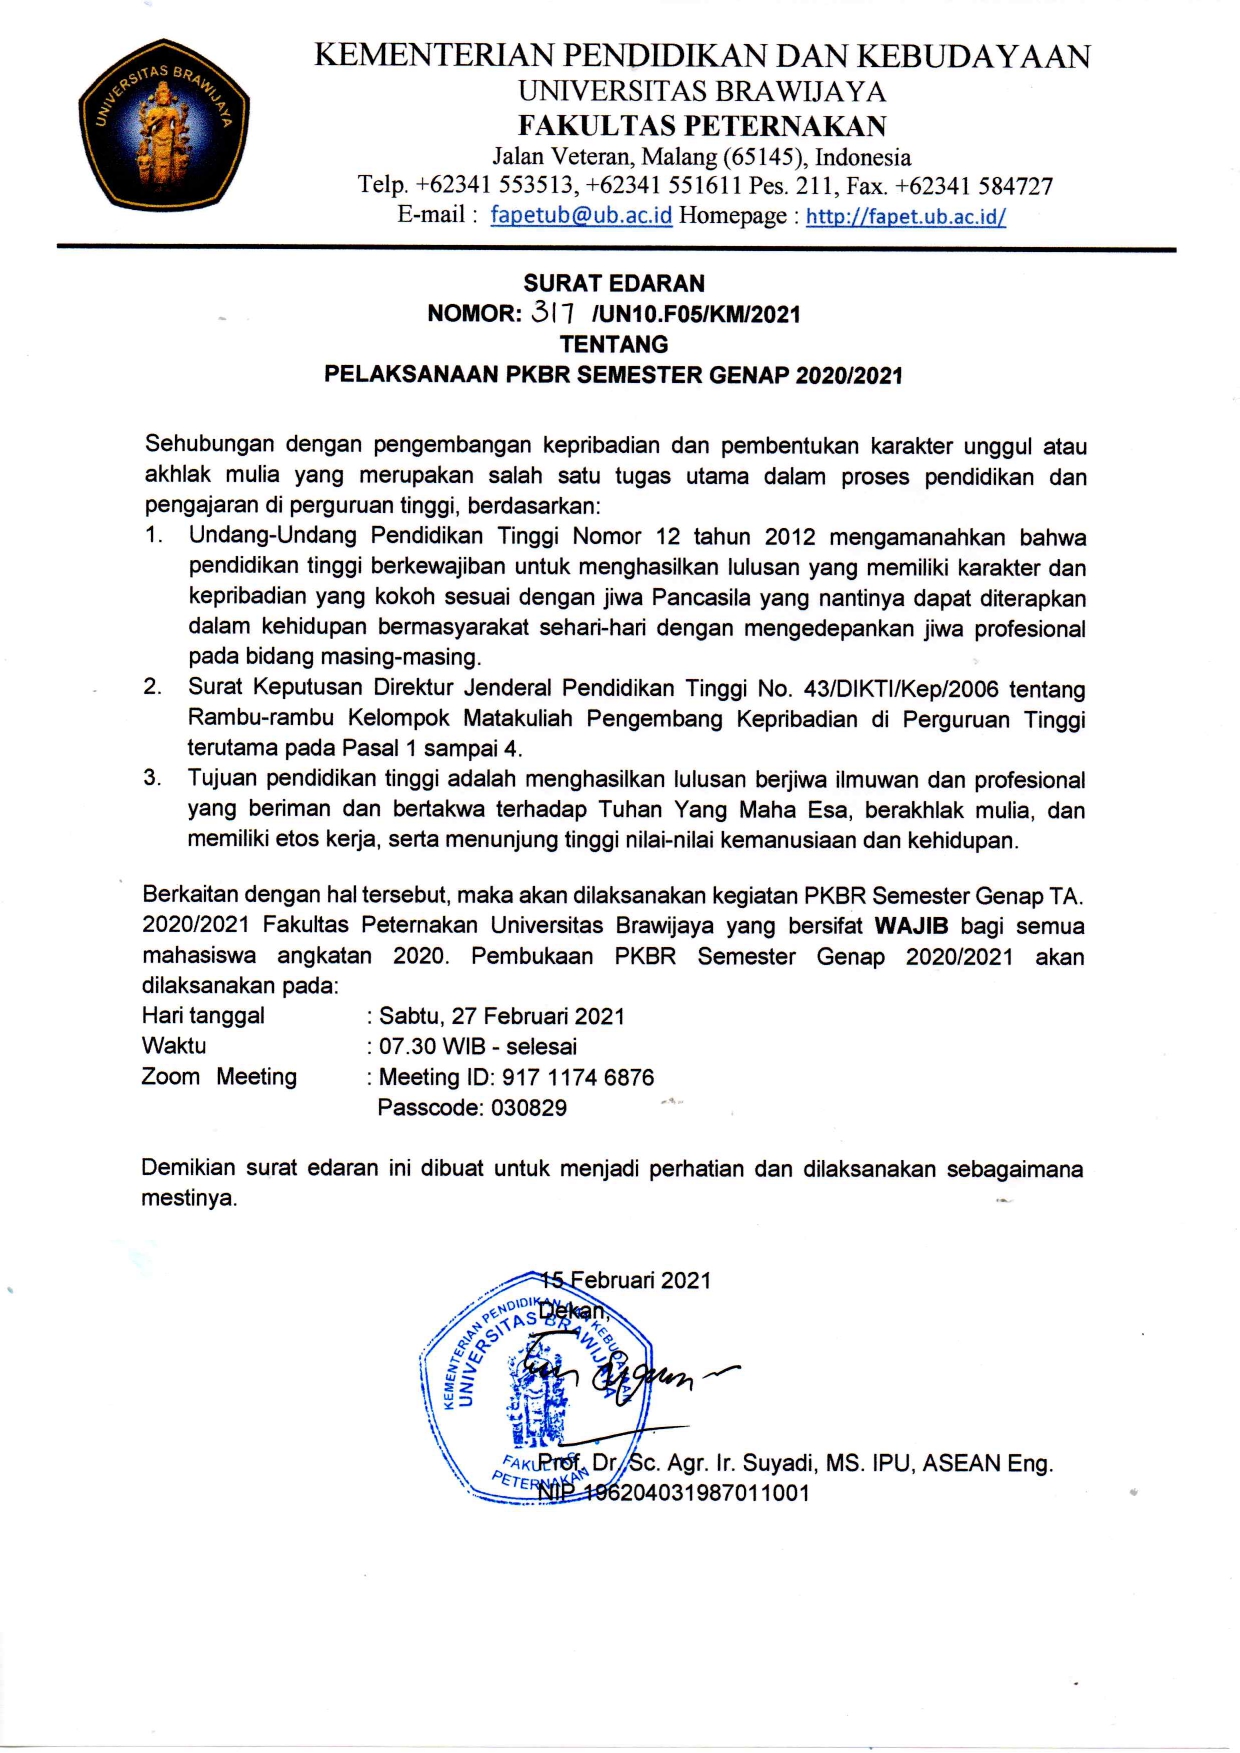 The Circular for the Implementation of the PKBR Even Semester 2020/2021 